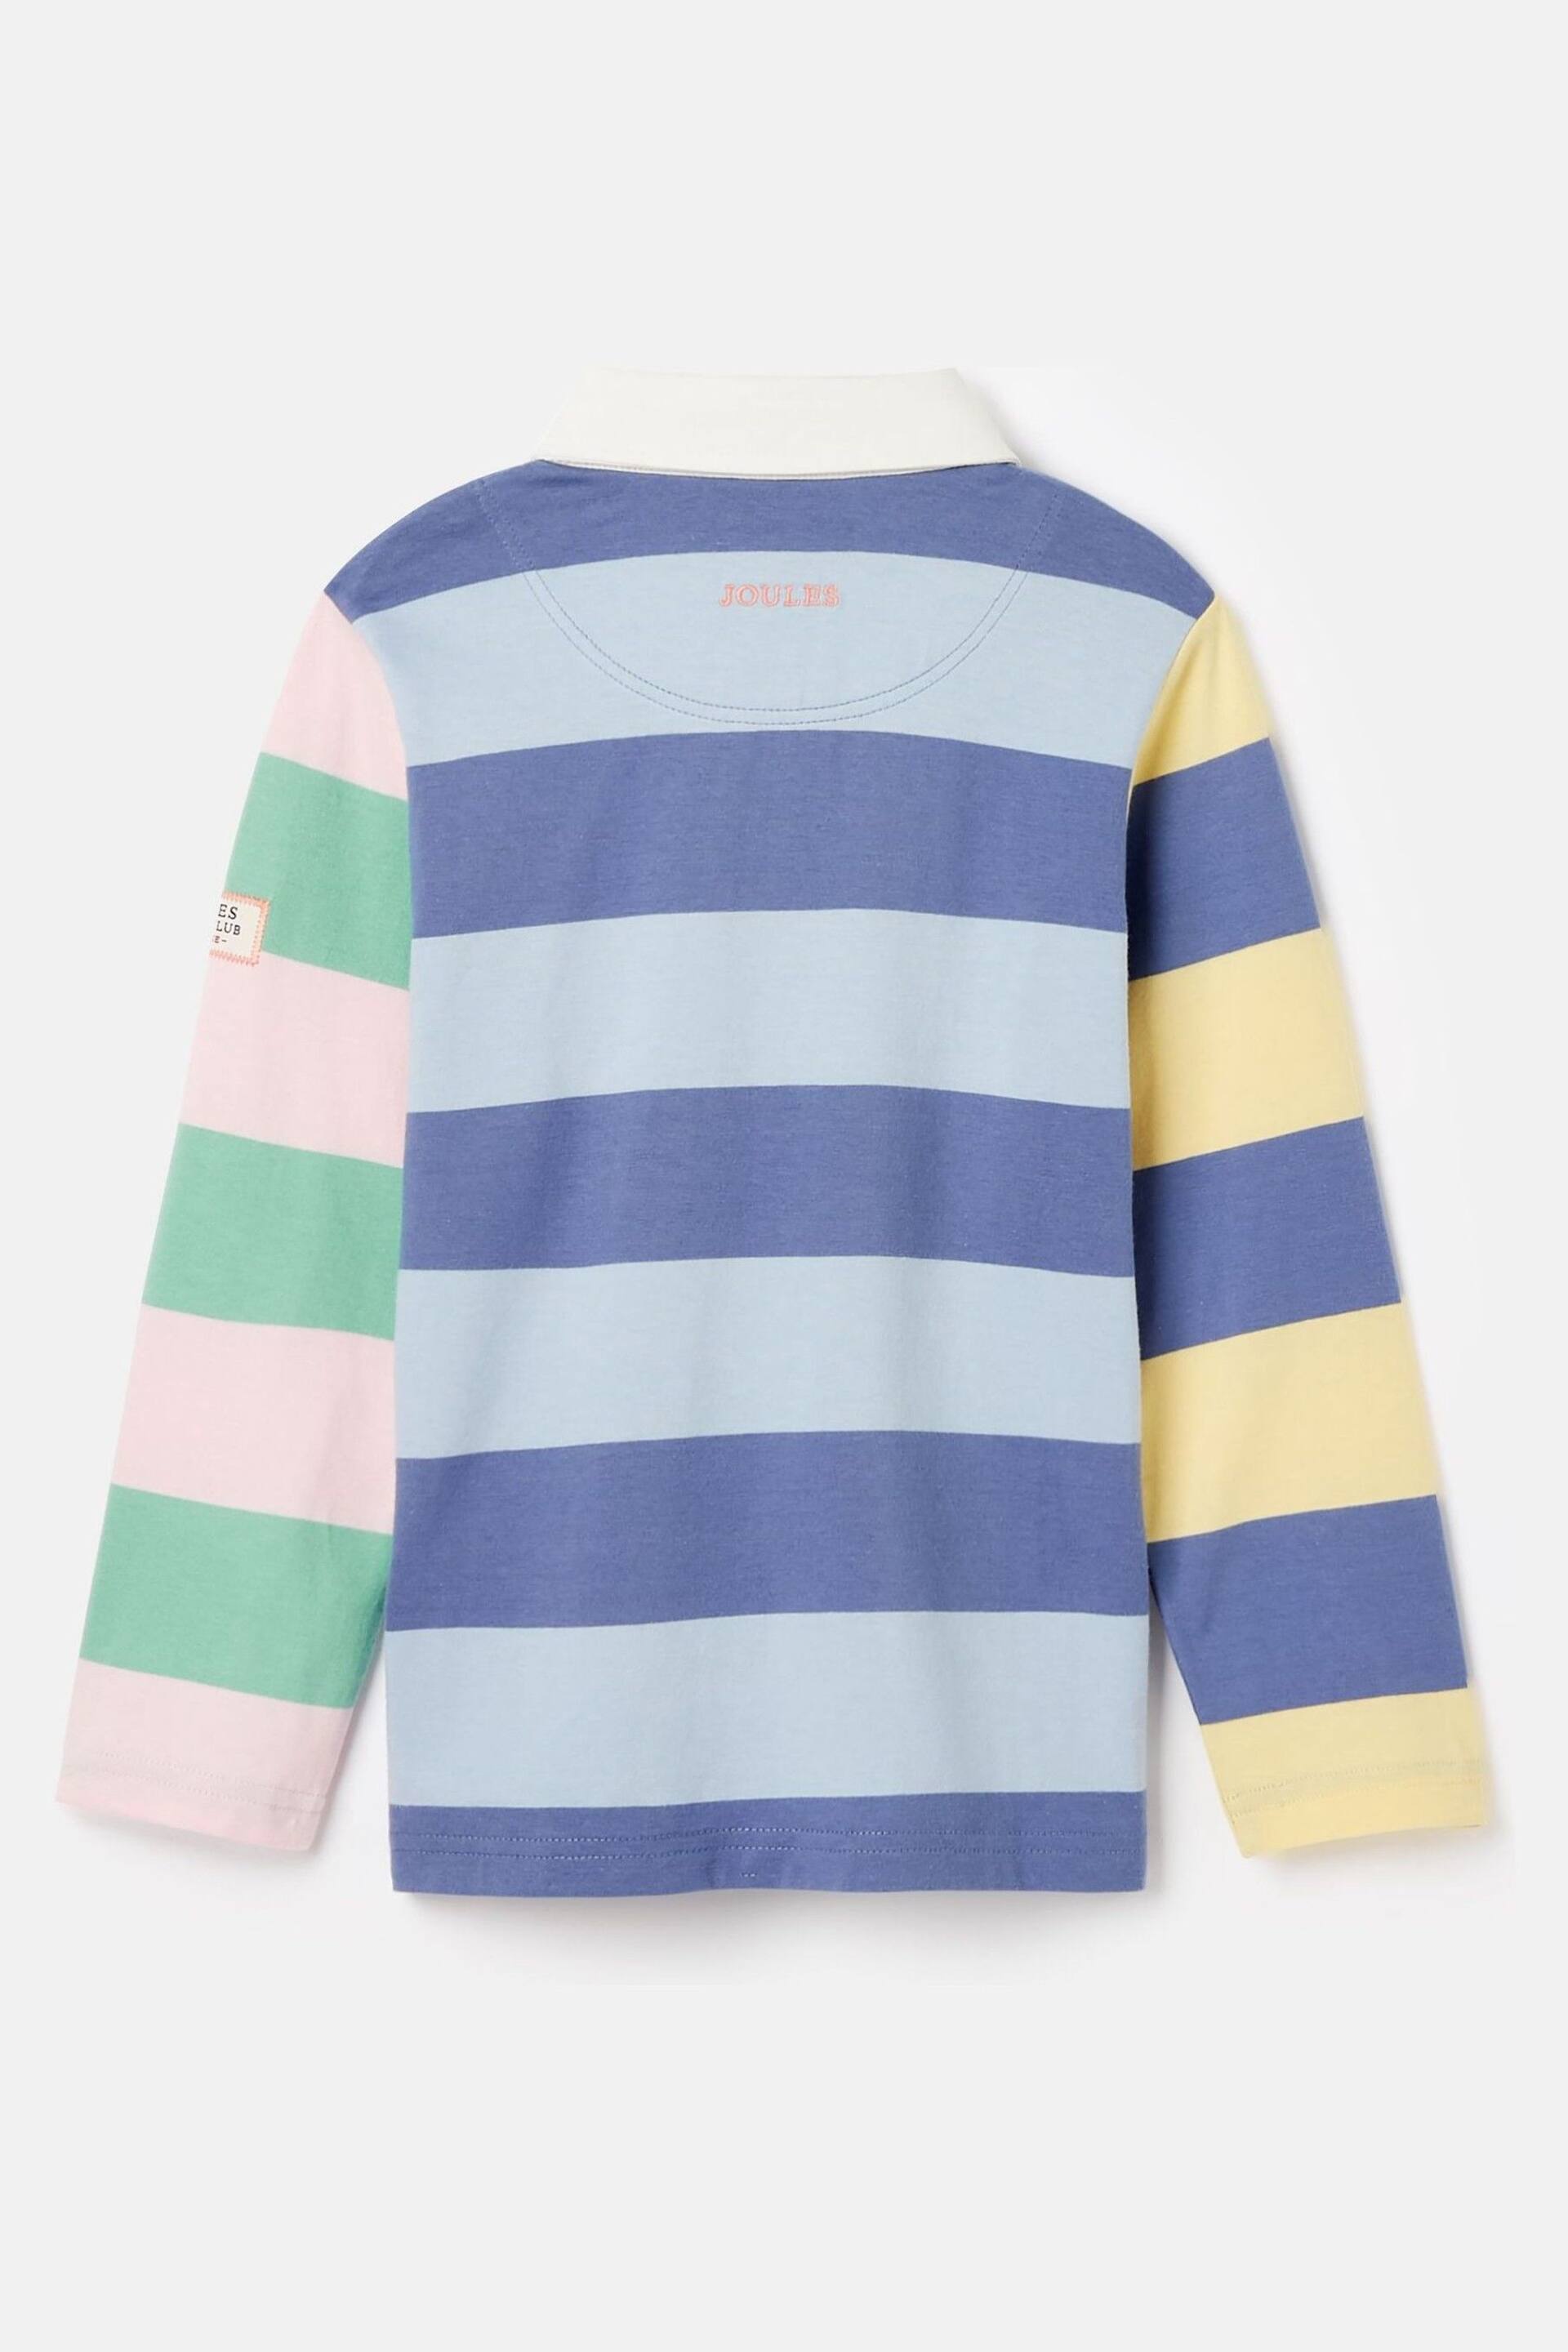 Joules Perry Multi Striped Rugby Shirt - Image 2 of 5